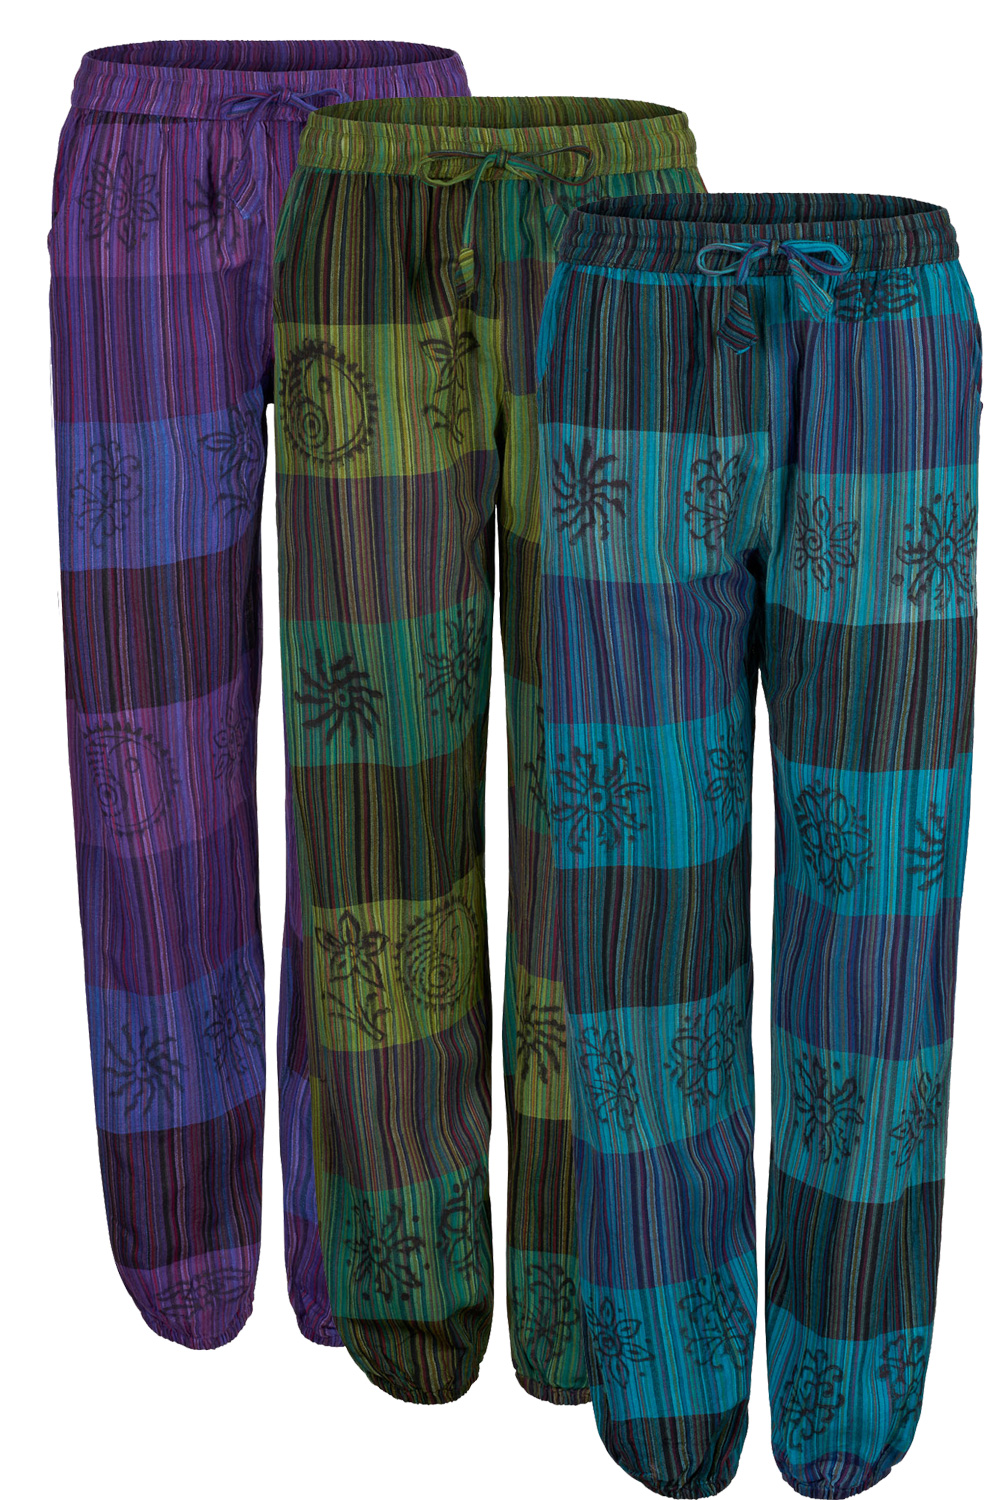 Long printed hippie trousers